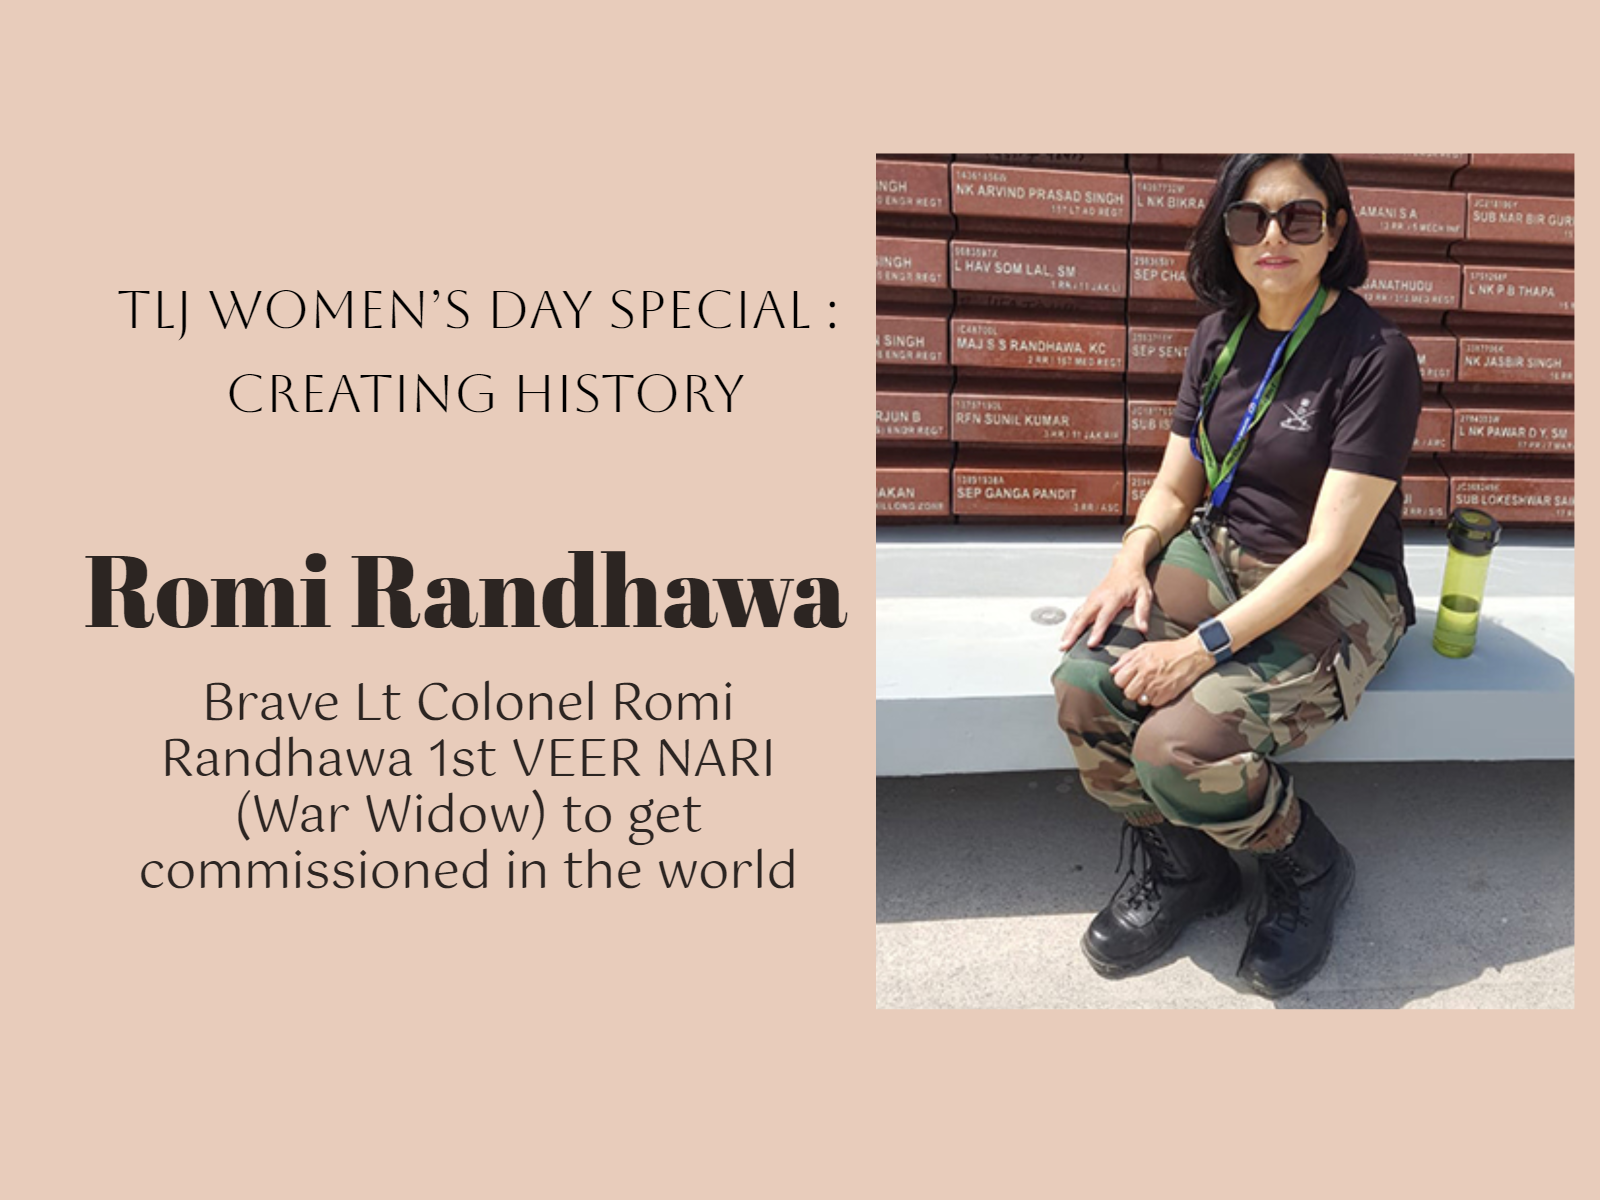 Women’s Day Special CREATING HISTORY